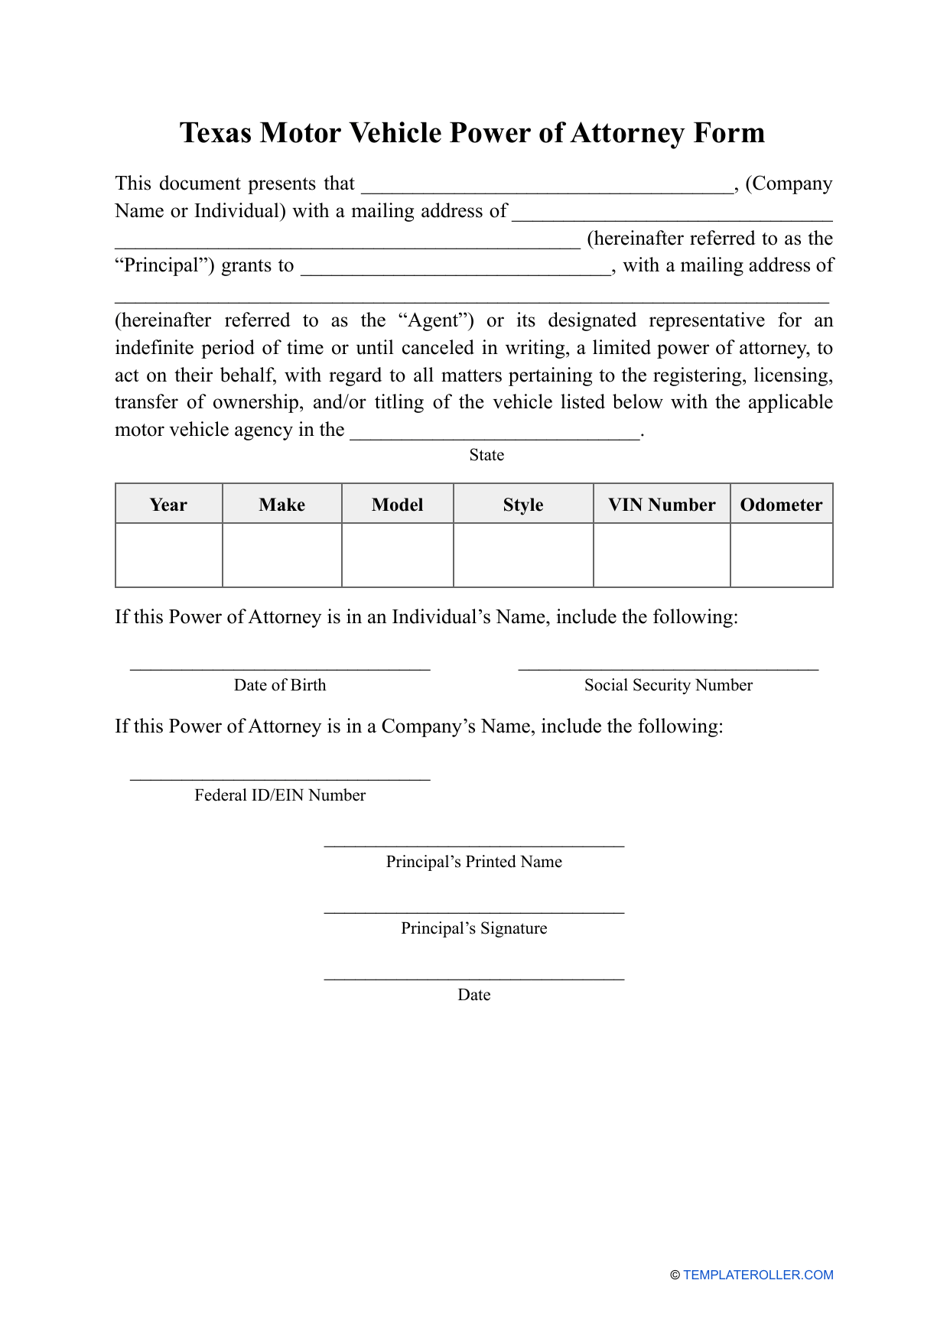 Motor Vehicle Power of Attorney Form - Texas, Page 1